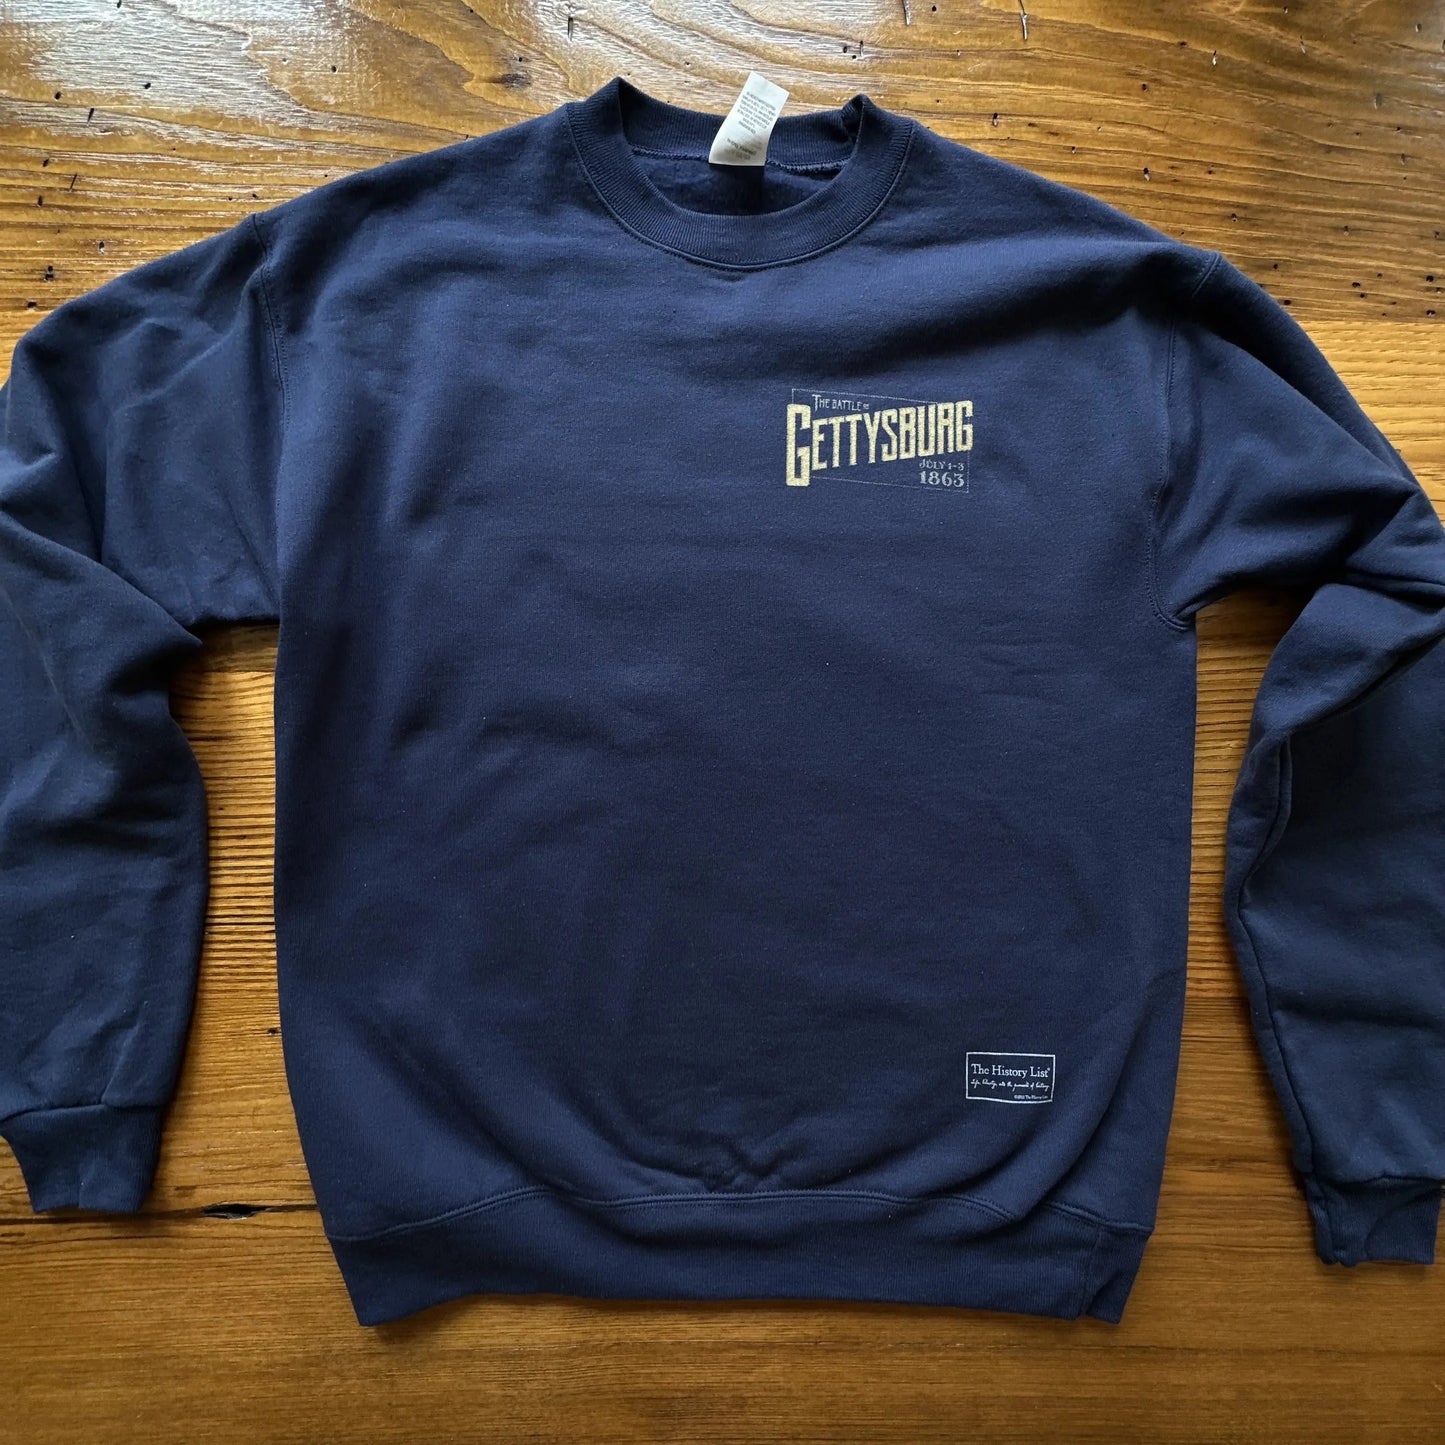 Front of "The Battle of Gettysburg" Crewneck sweatshirt from The History List store